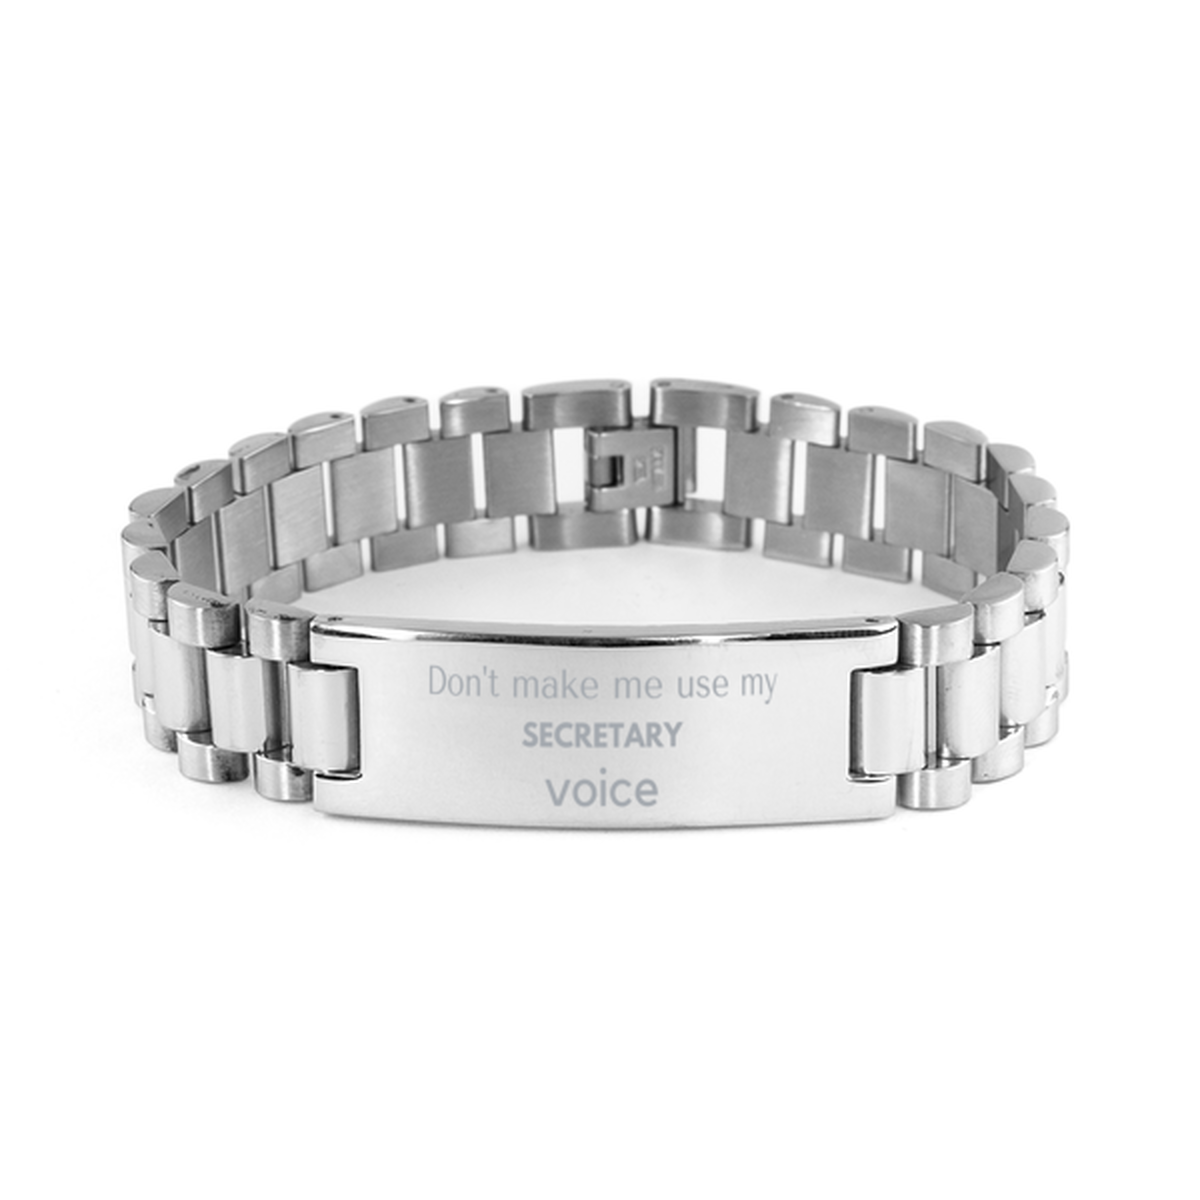 Don't make me use my Secretary voice, Sarcasm Secretary Gifts, Christmas Secretary Ladder Stainless Steel Bracelet Birthday Unique Gifts For Secretary Coworkers, Men, Women, Colleague, Friends